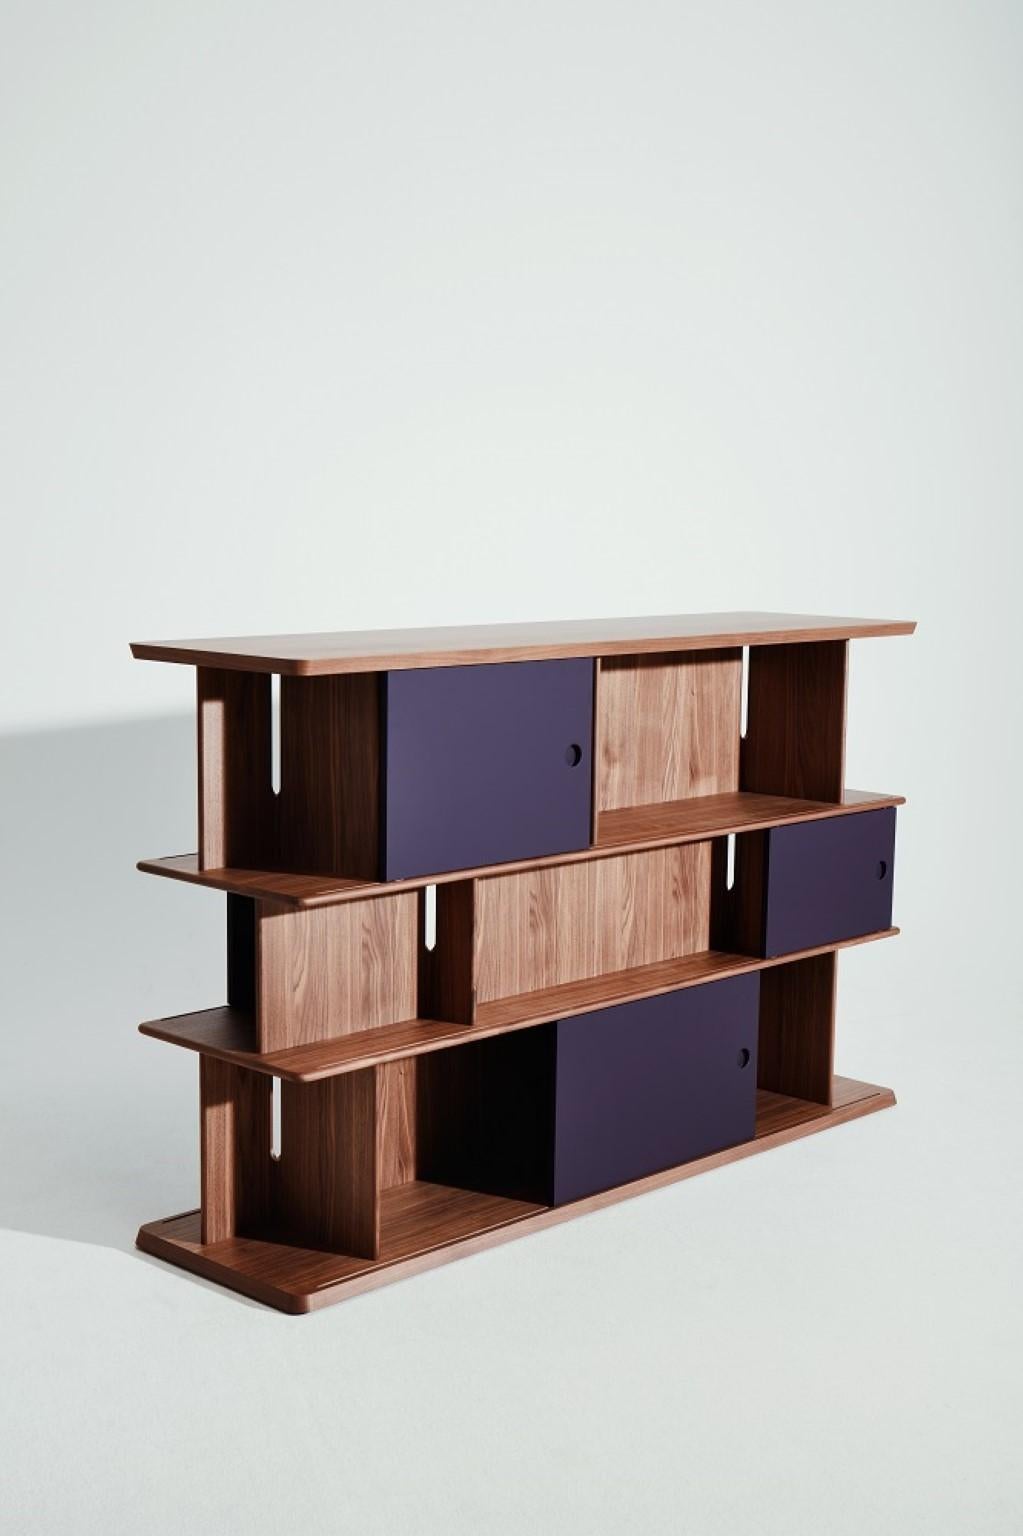 Small Bookshelf by Neri&Hu
Dimensions: W 201.8 x D 55 x H 123 cm
Materials: Canaletto walnut veneer wood
Doors: Dark green, prune, warm white lacquered mdf

Founded in 2004 by partners Lyndon Neri and Rossana Hu, Neri&Hu Design and Research